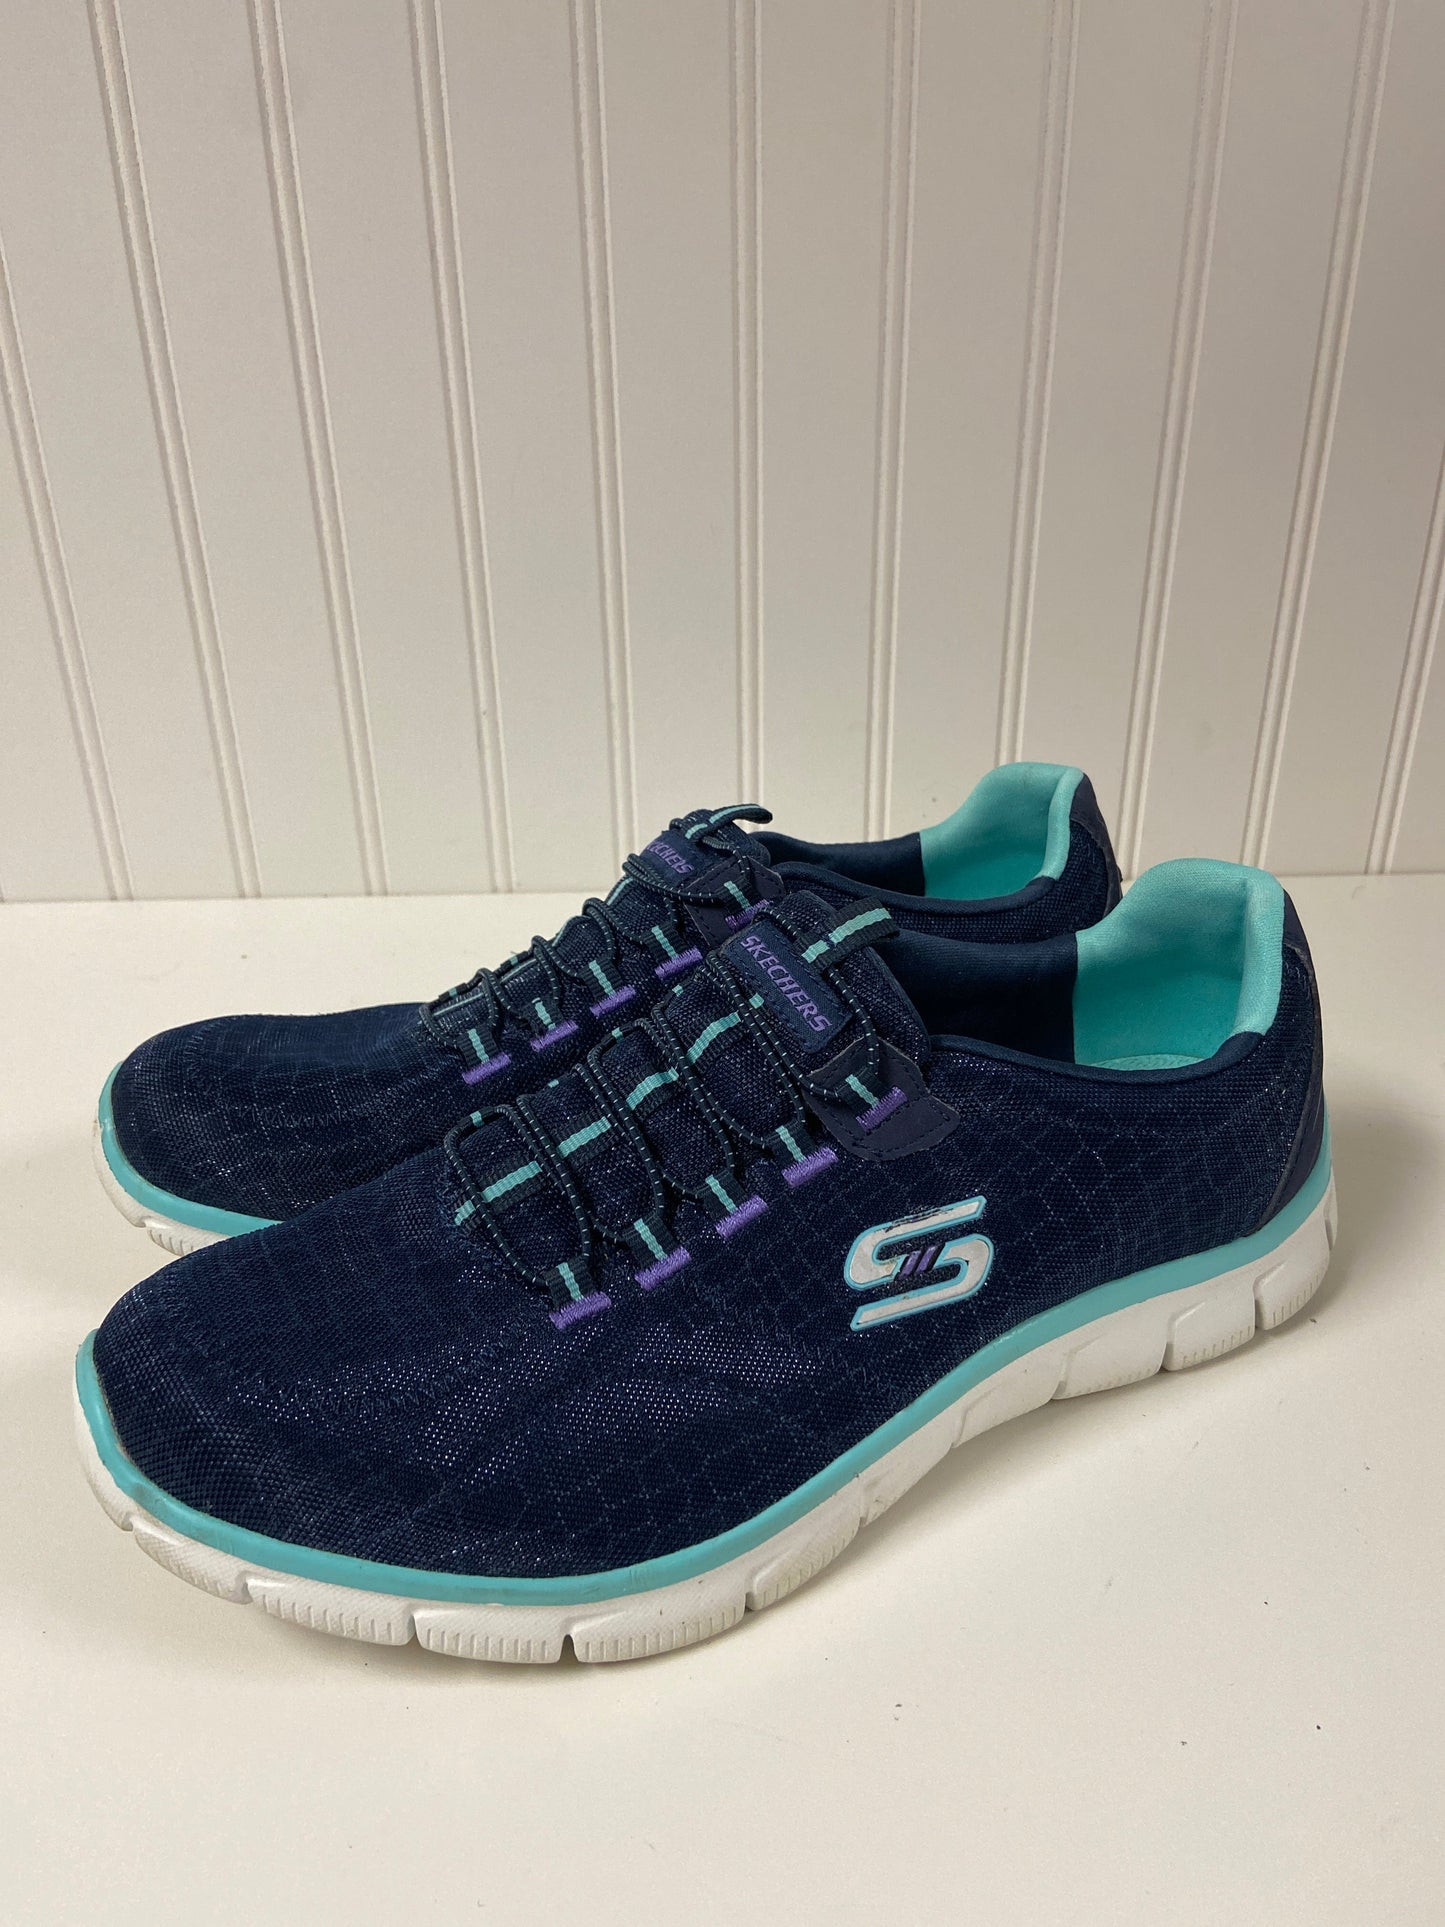 Navy Shoes Athletic Skechers, Size 11